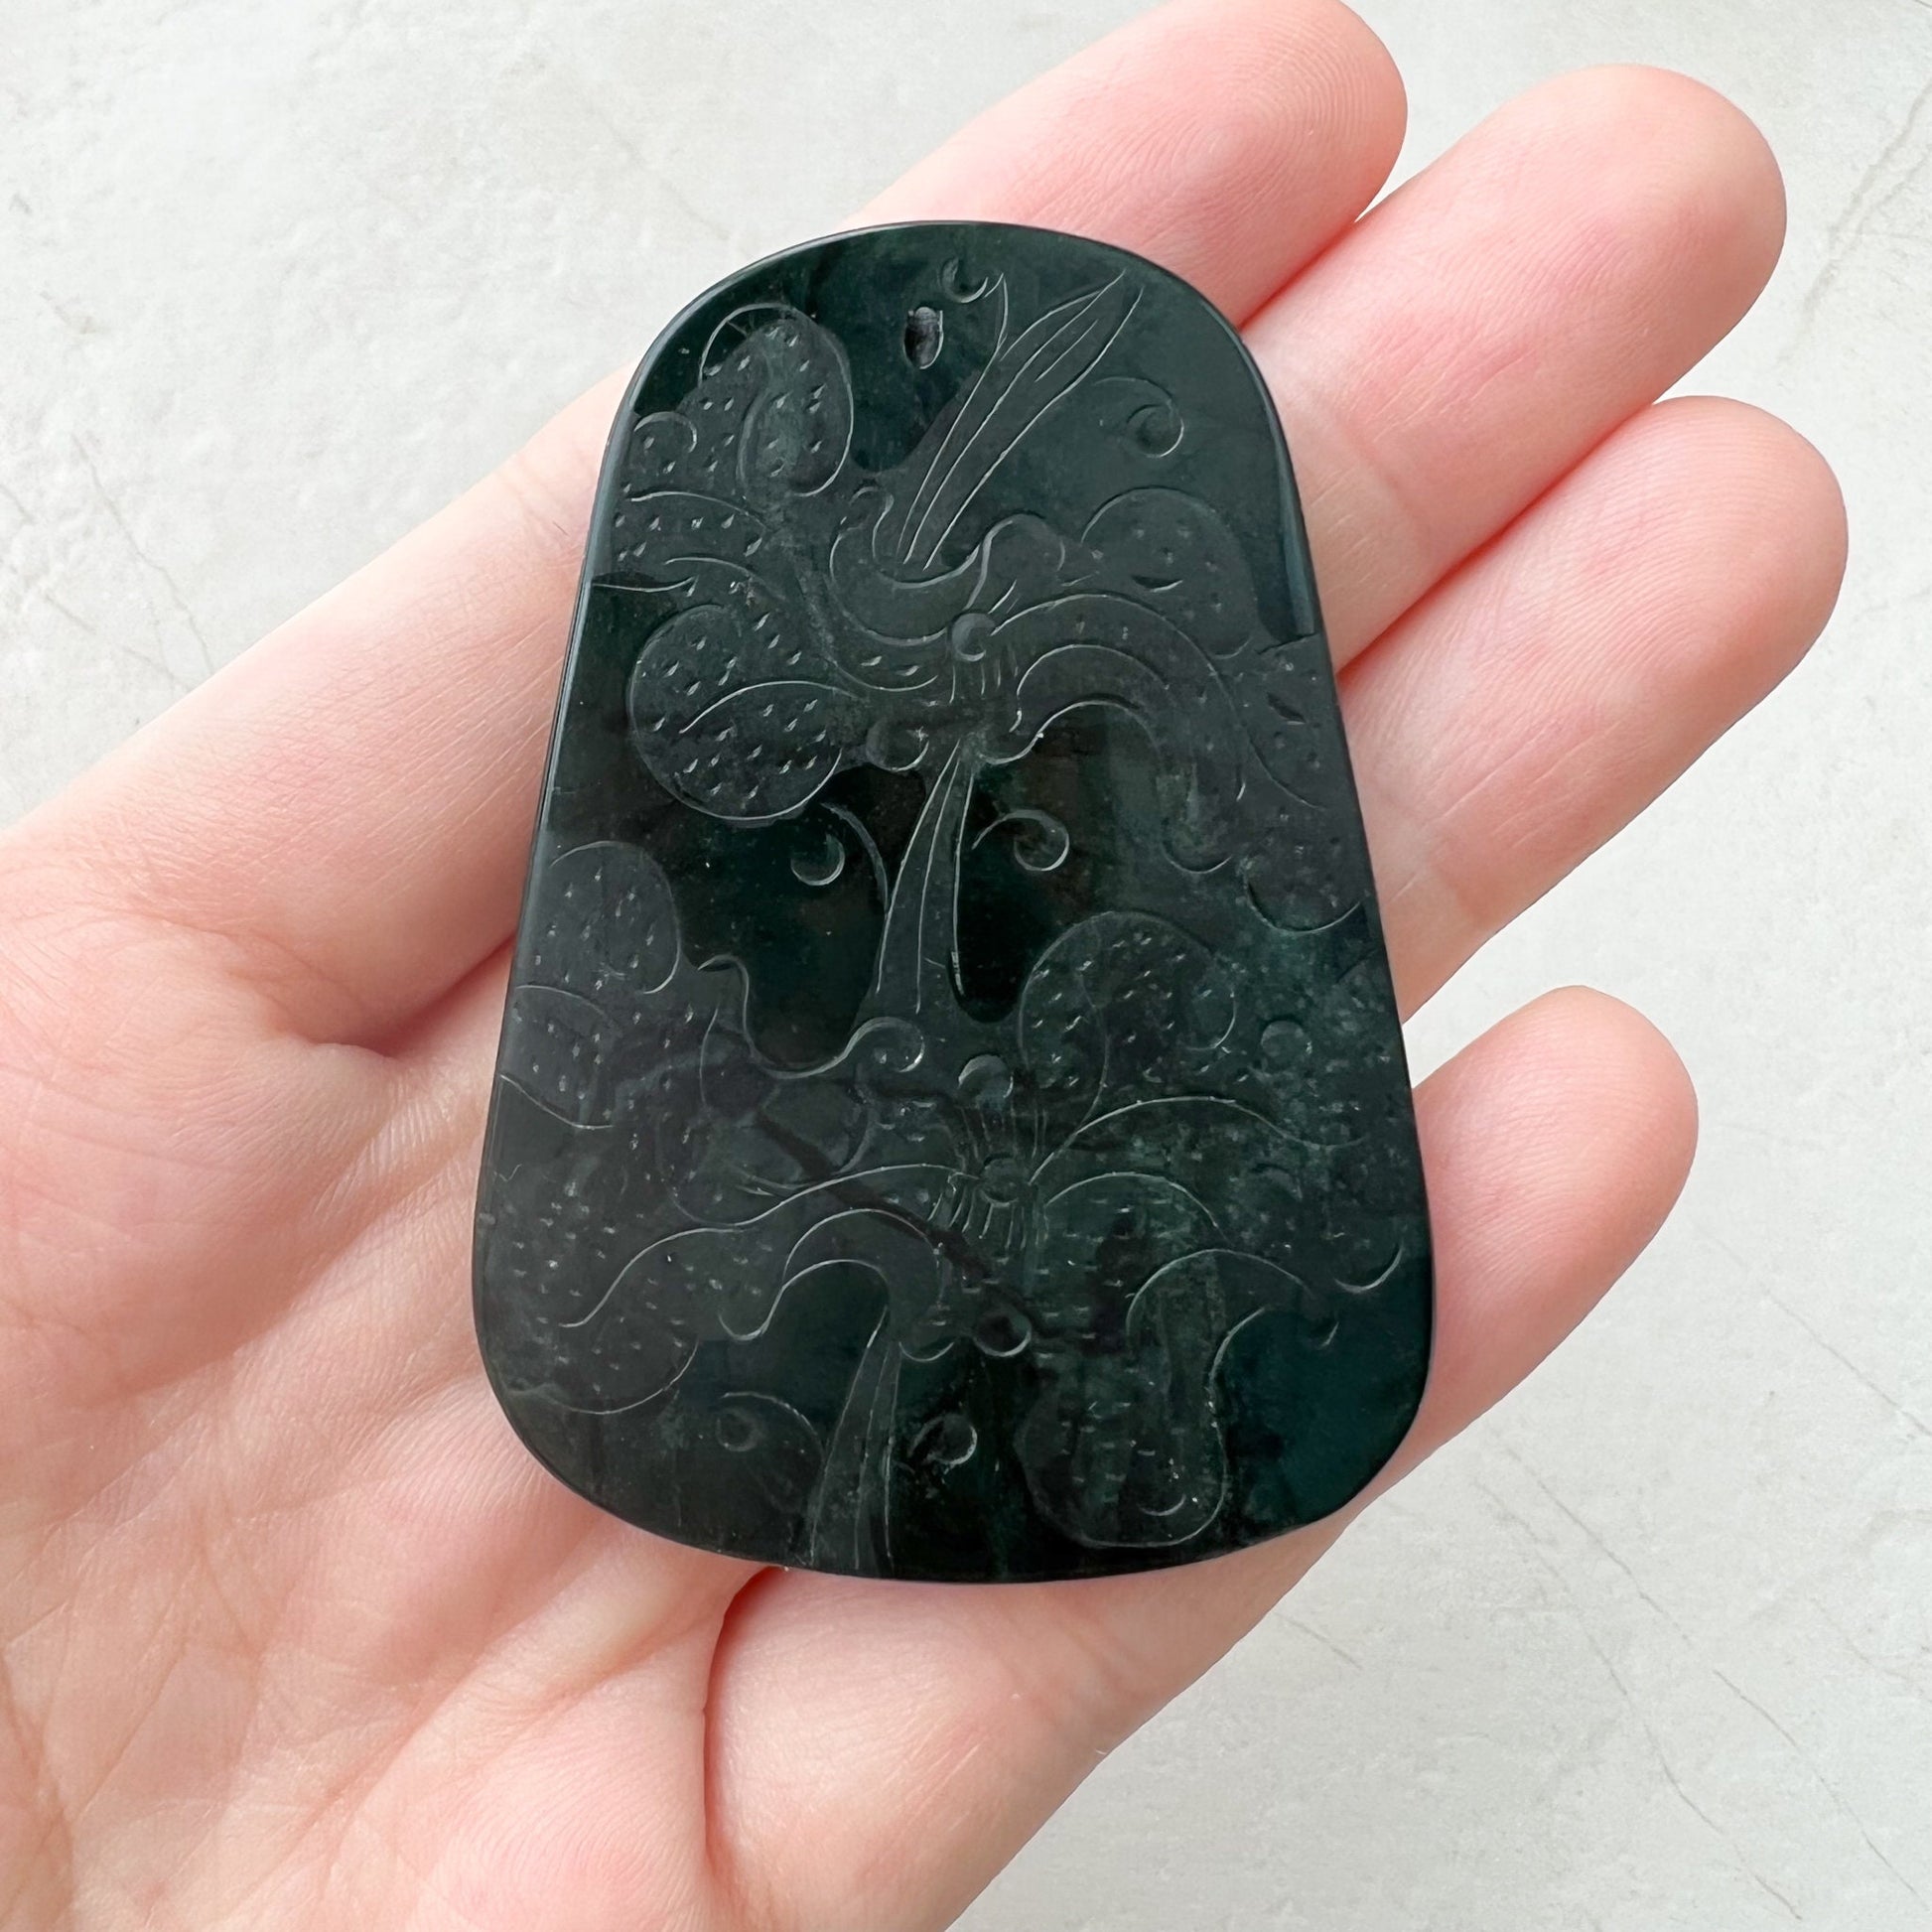 Black Jade Tiger, Jadeite Jade Omphacite, Chinese Zodiac Carved Pendant Necklace, LGG-1221-1646840030 - AriaDesignCollection